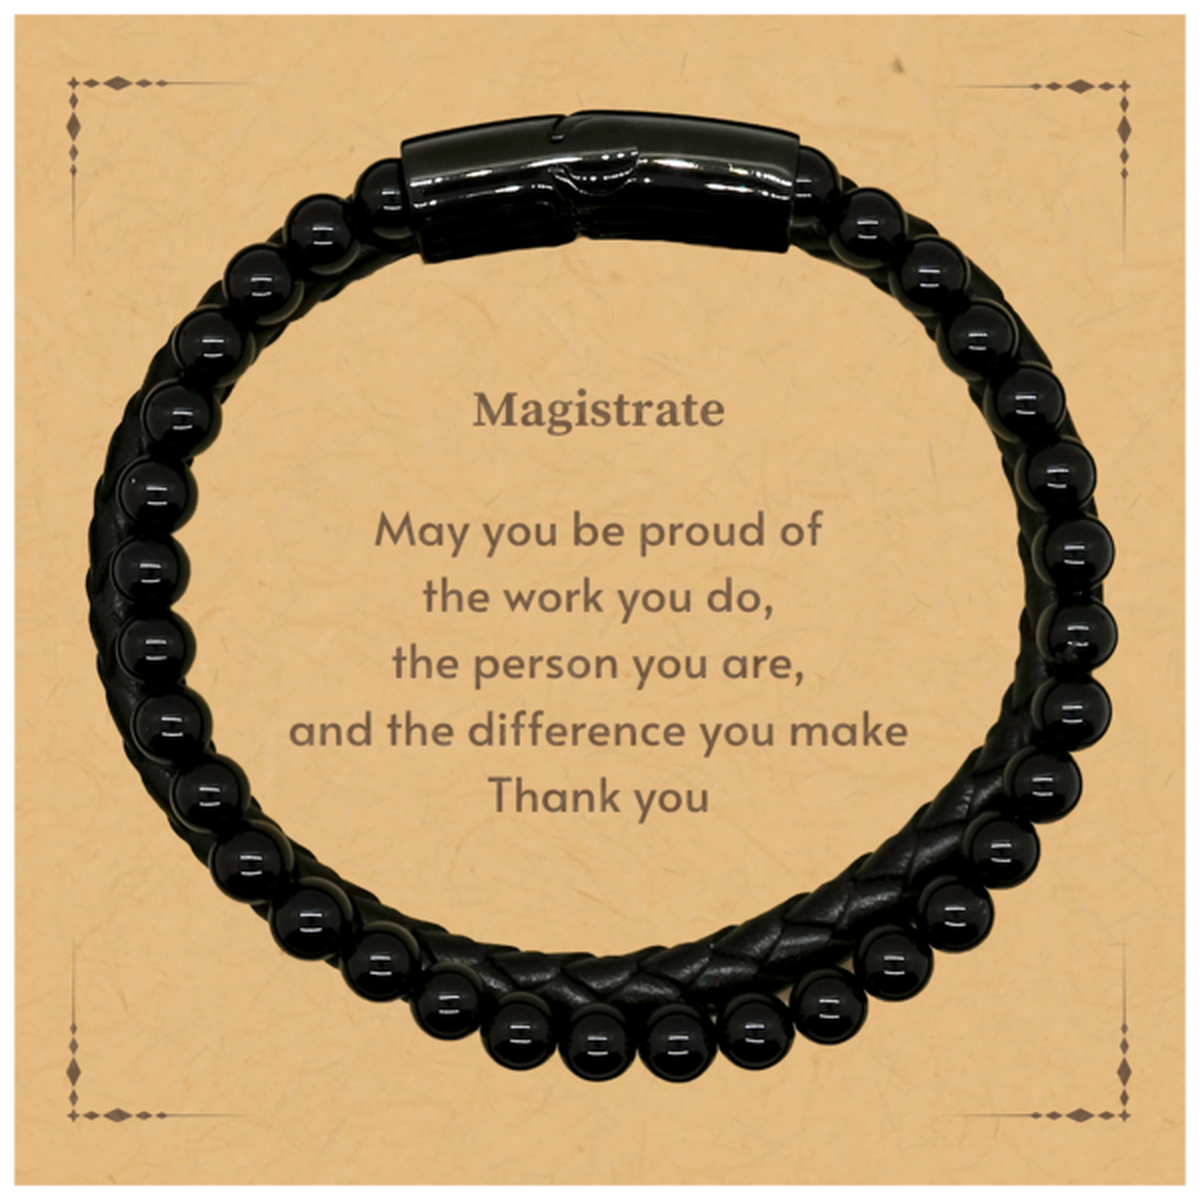 Heartwarming Stone Leather Bracelets Retirement Coworkers Gifts for Magistrate, Magistrate May You be proud of the work you do, the person you are Gifts for Boss Men Women Friends